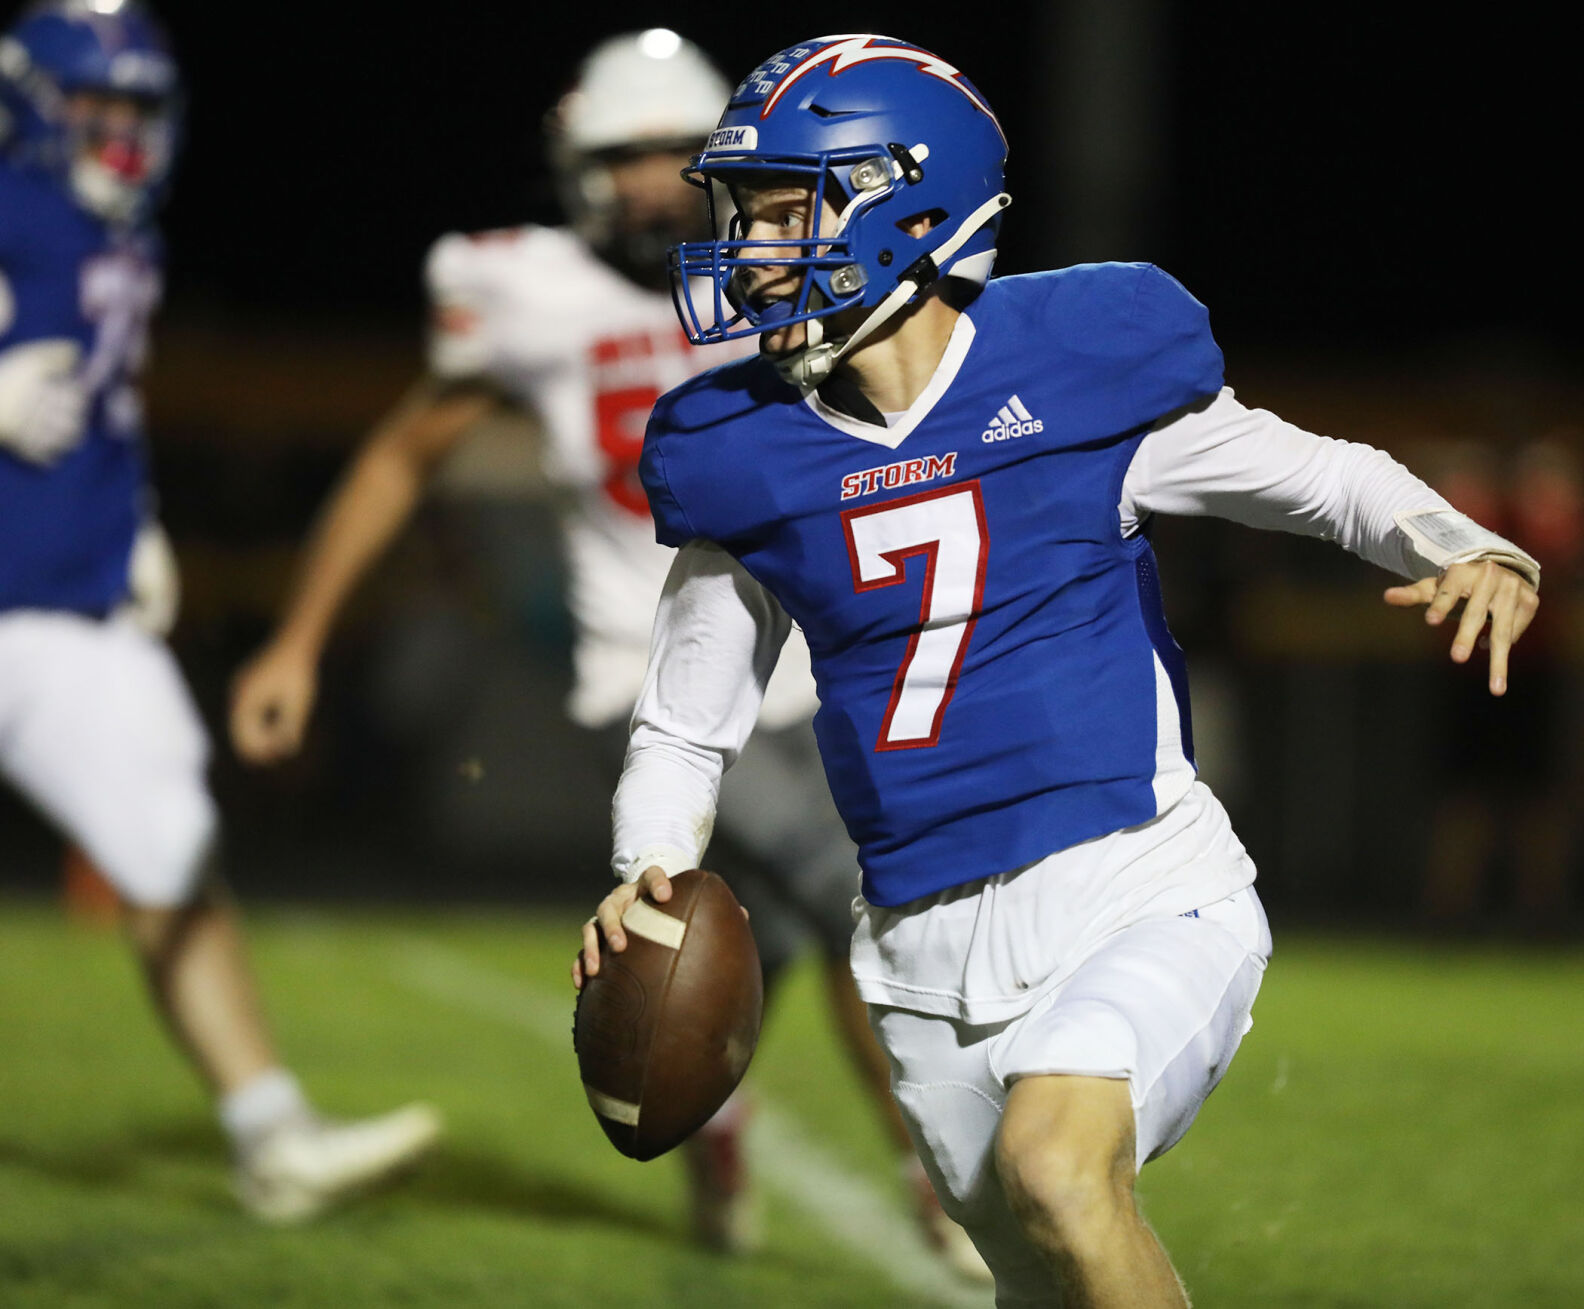 Camanche Storm Clinches Second Seed in District After Dominant Performance